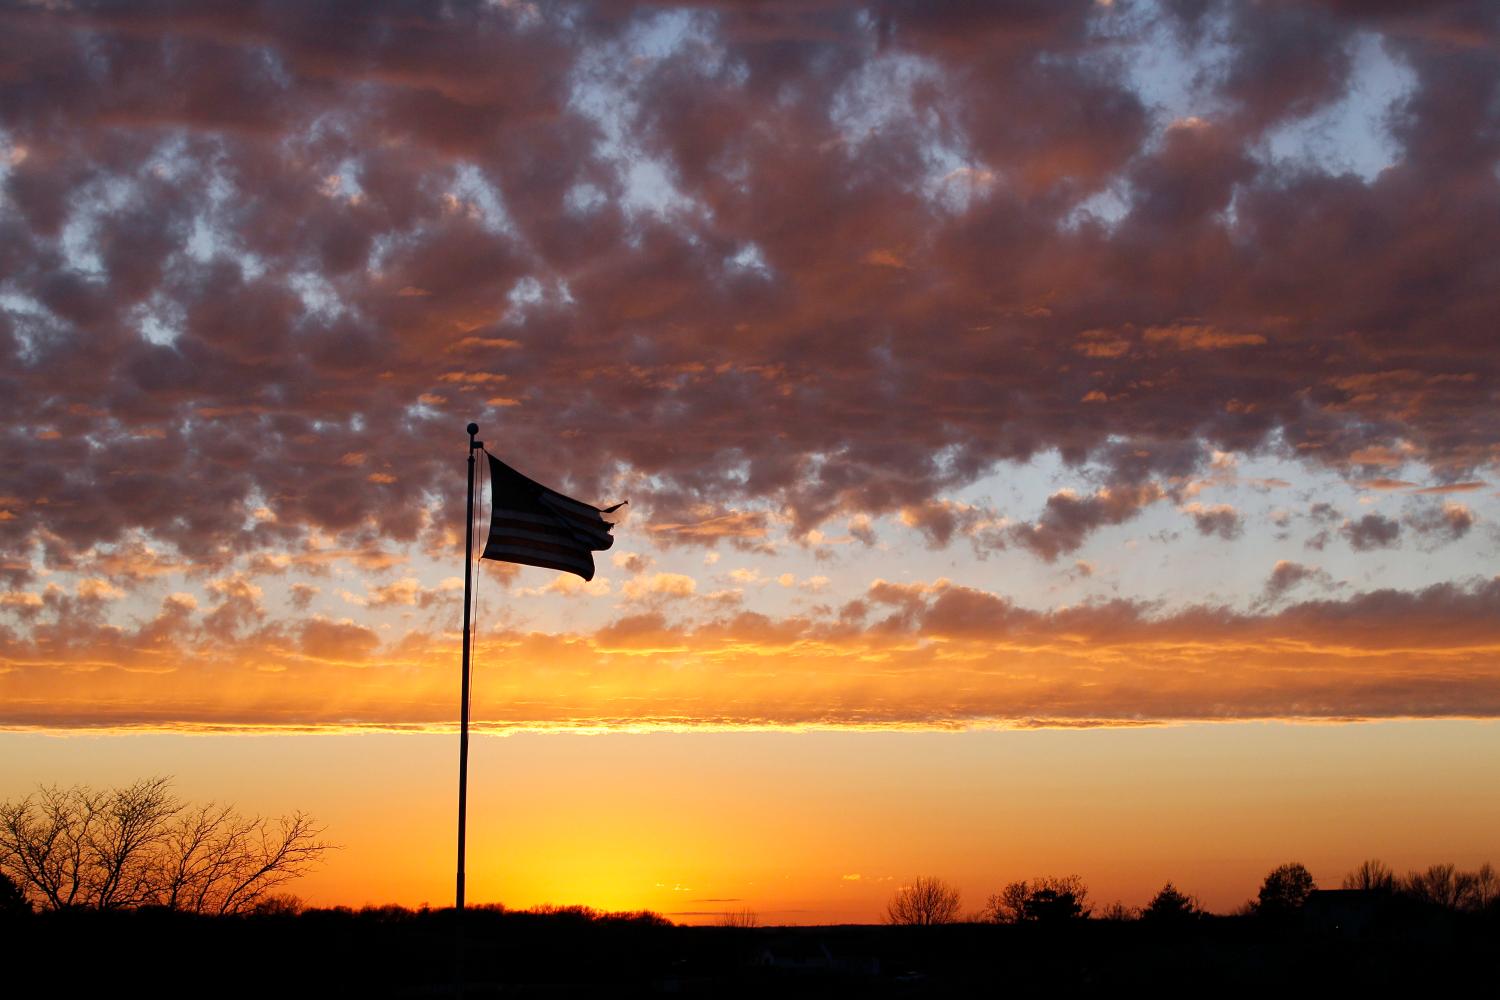 A tattered American flag flies at sunset over a military veterans' cemetery outside of Knoxville, Iowa December 31, 2011. REUTERS/Rick Wilking (UNITED STATES - Tags: SOCIETY) - GM1E8110M1U01